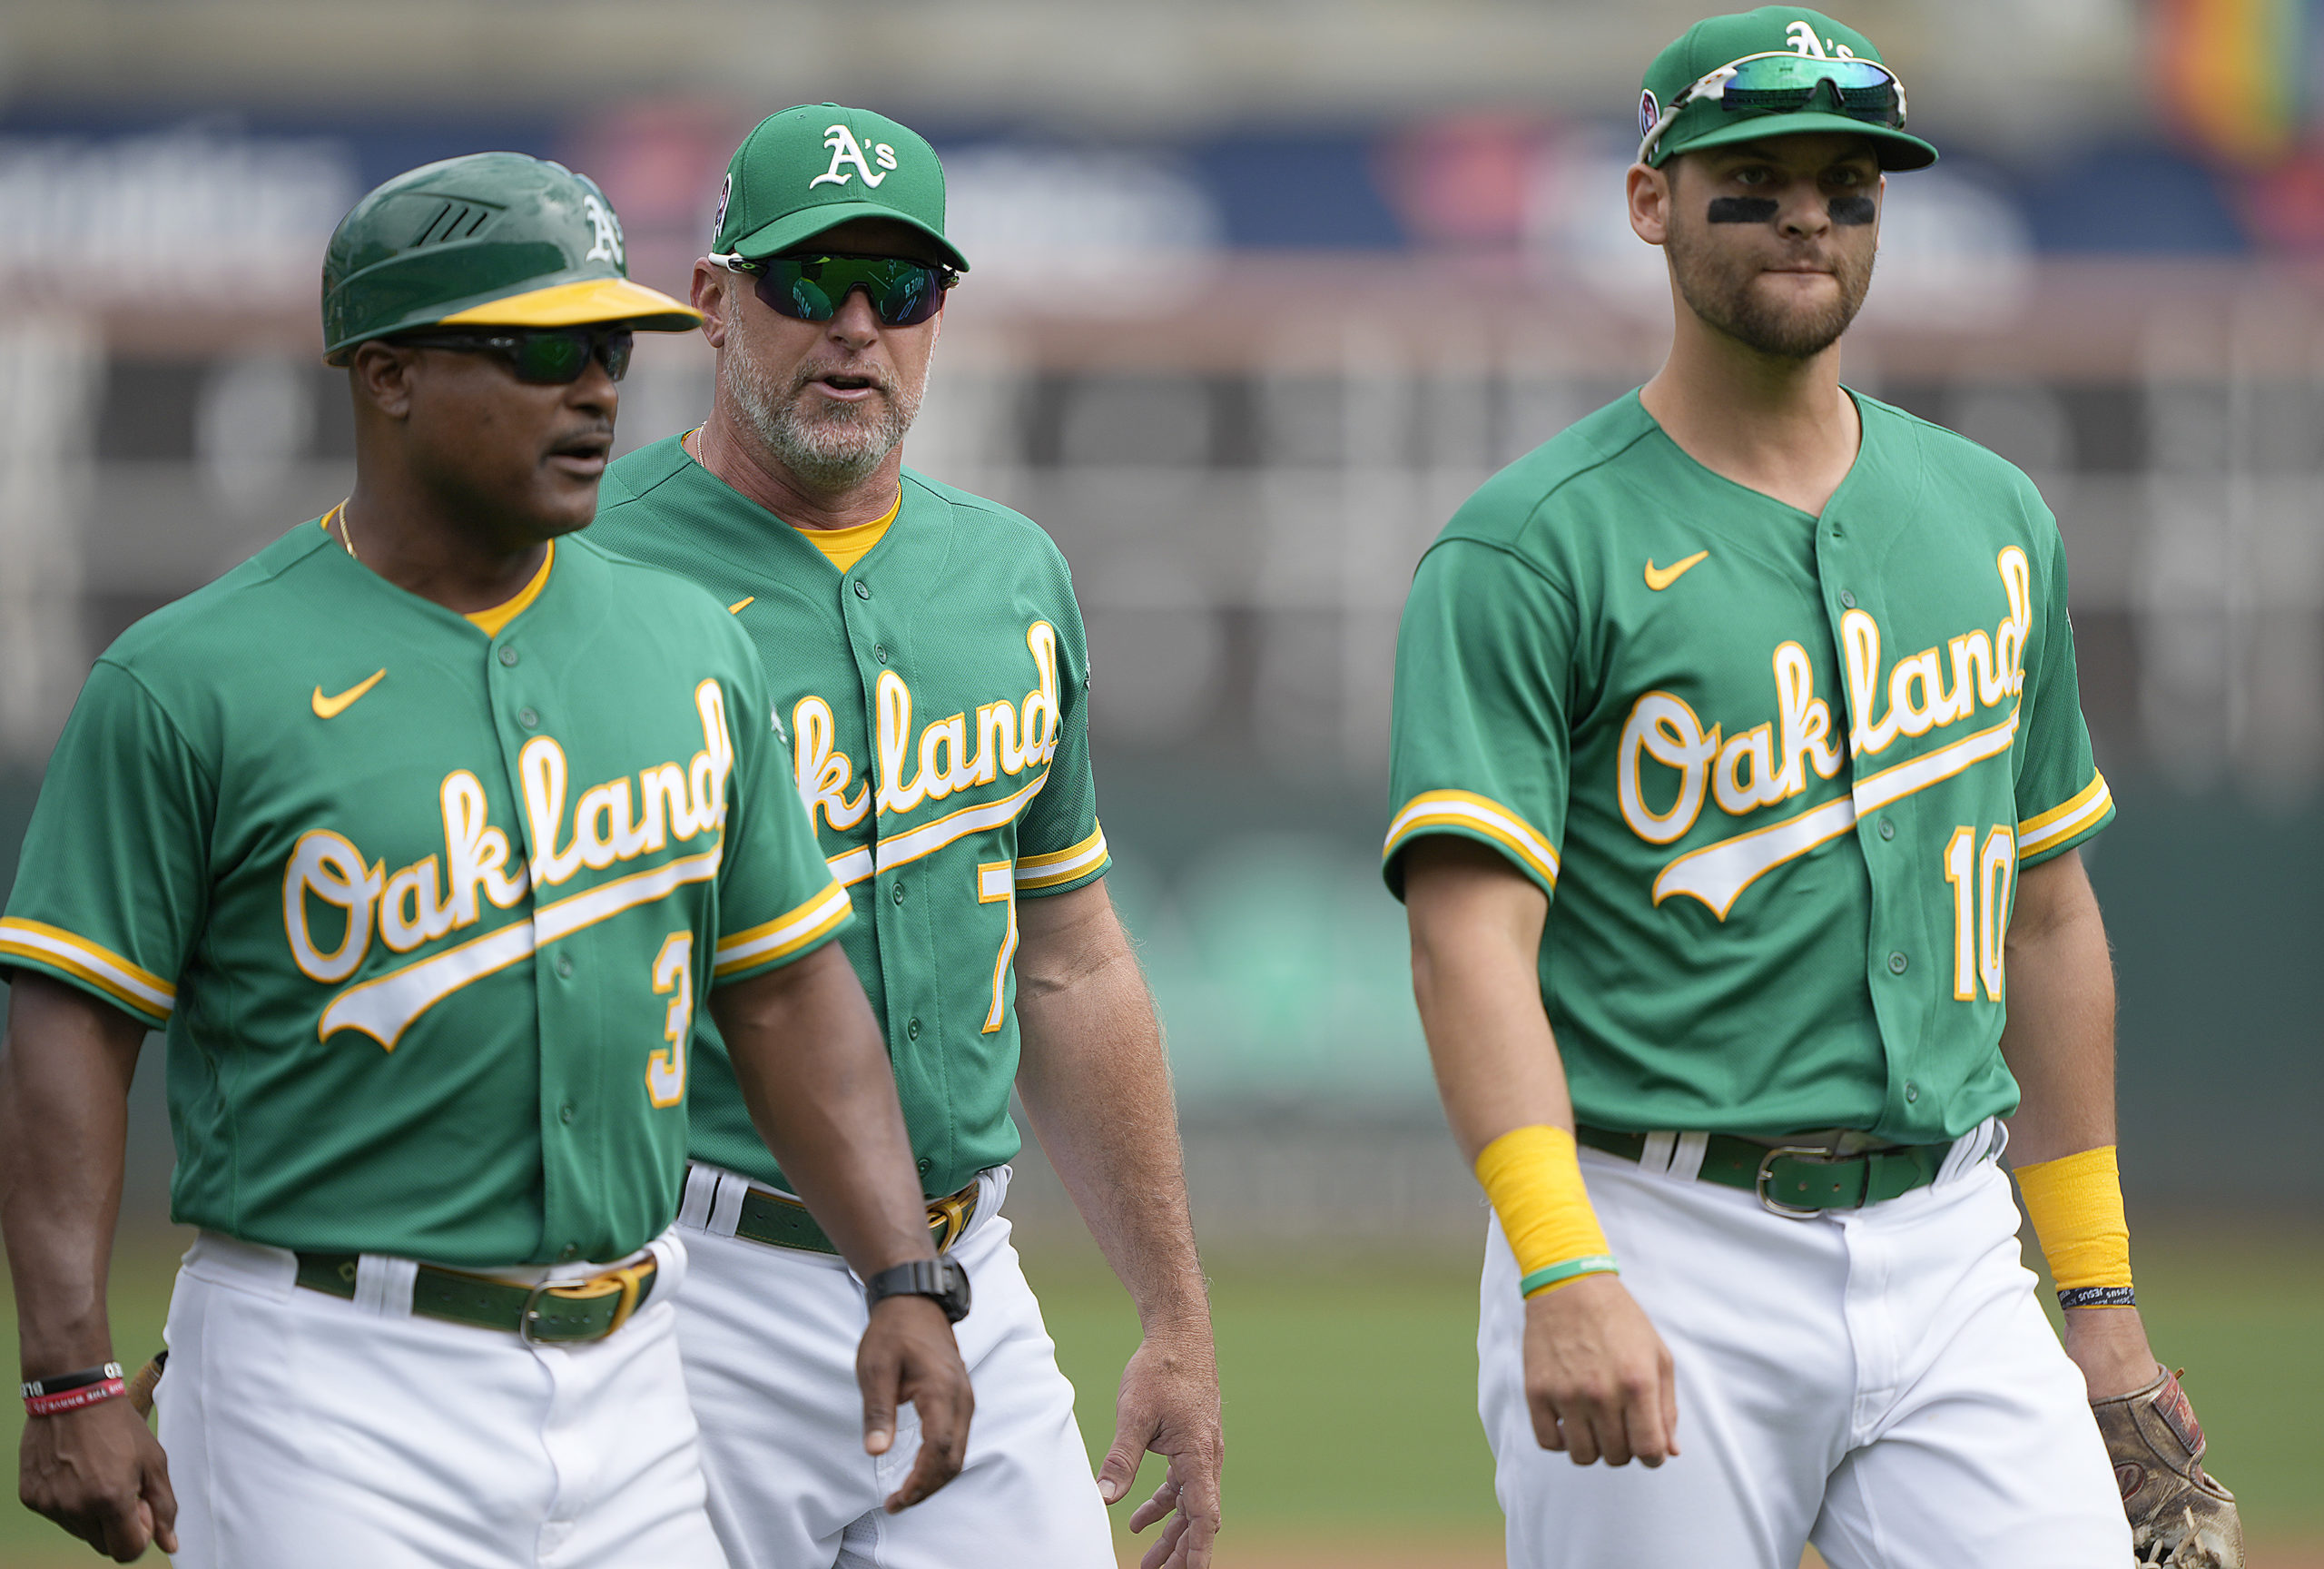 A's players walk on field with manager...